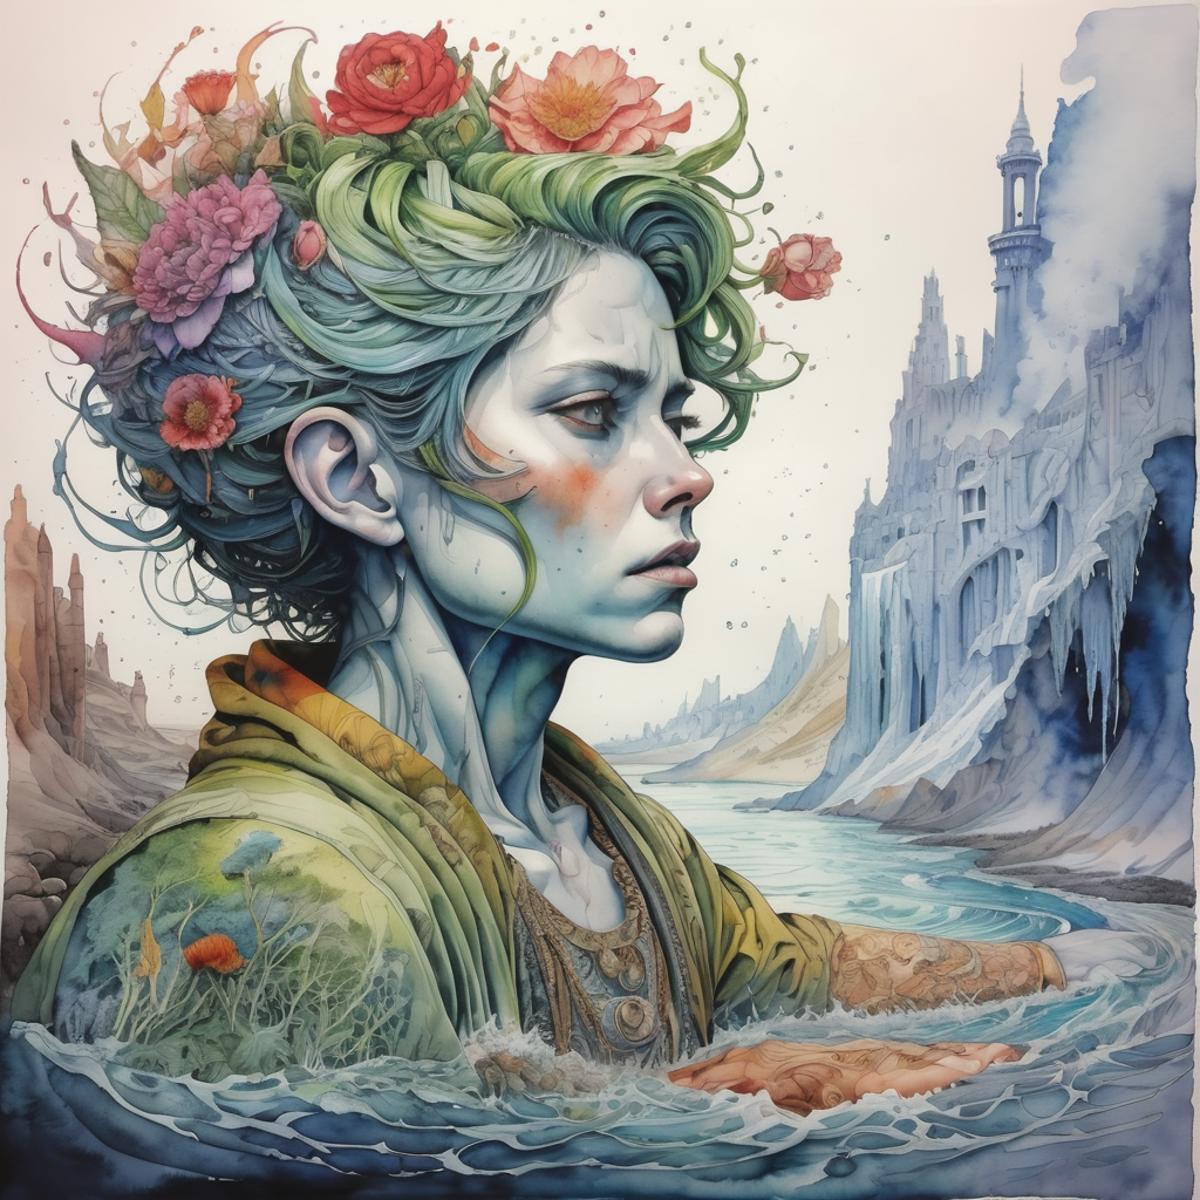 A painting of a woman with flowers in her hair, wearing a green shirt, and looking into the water.